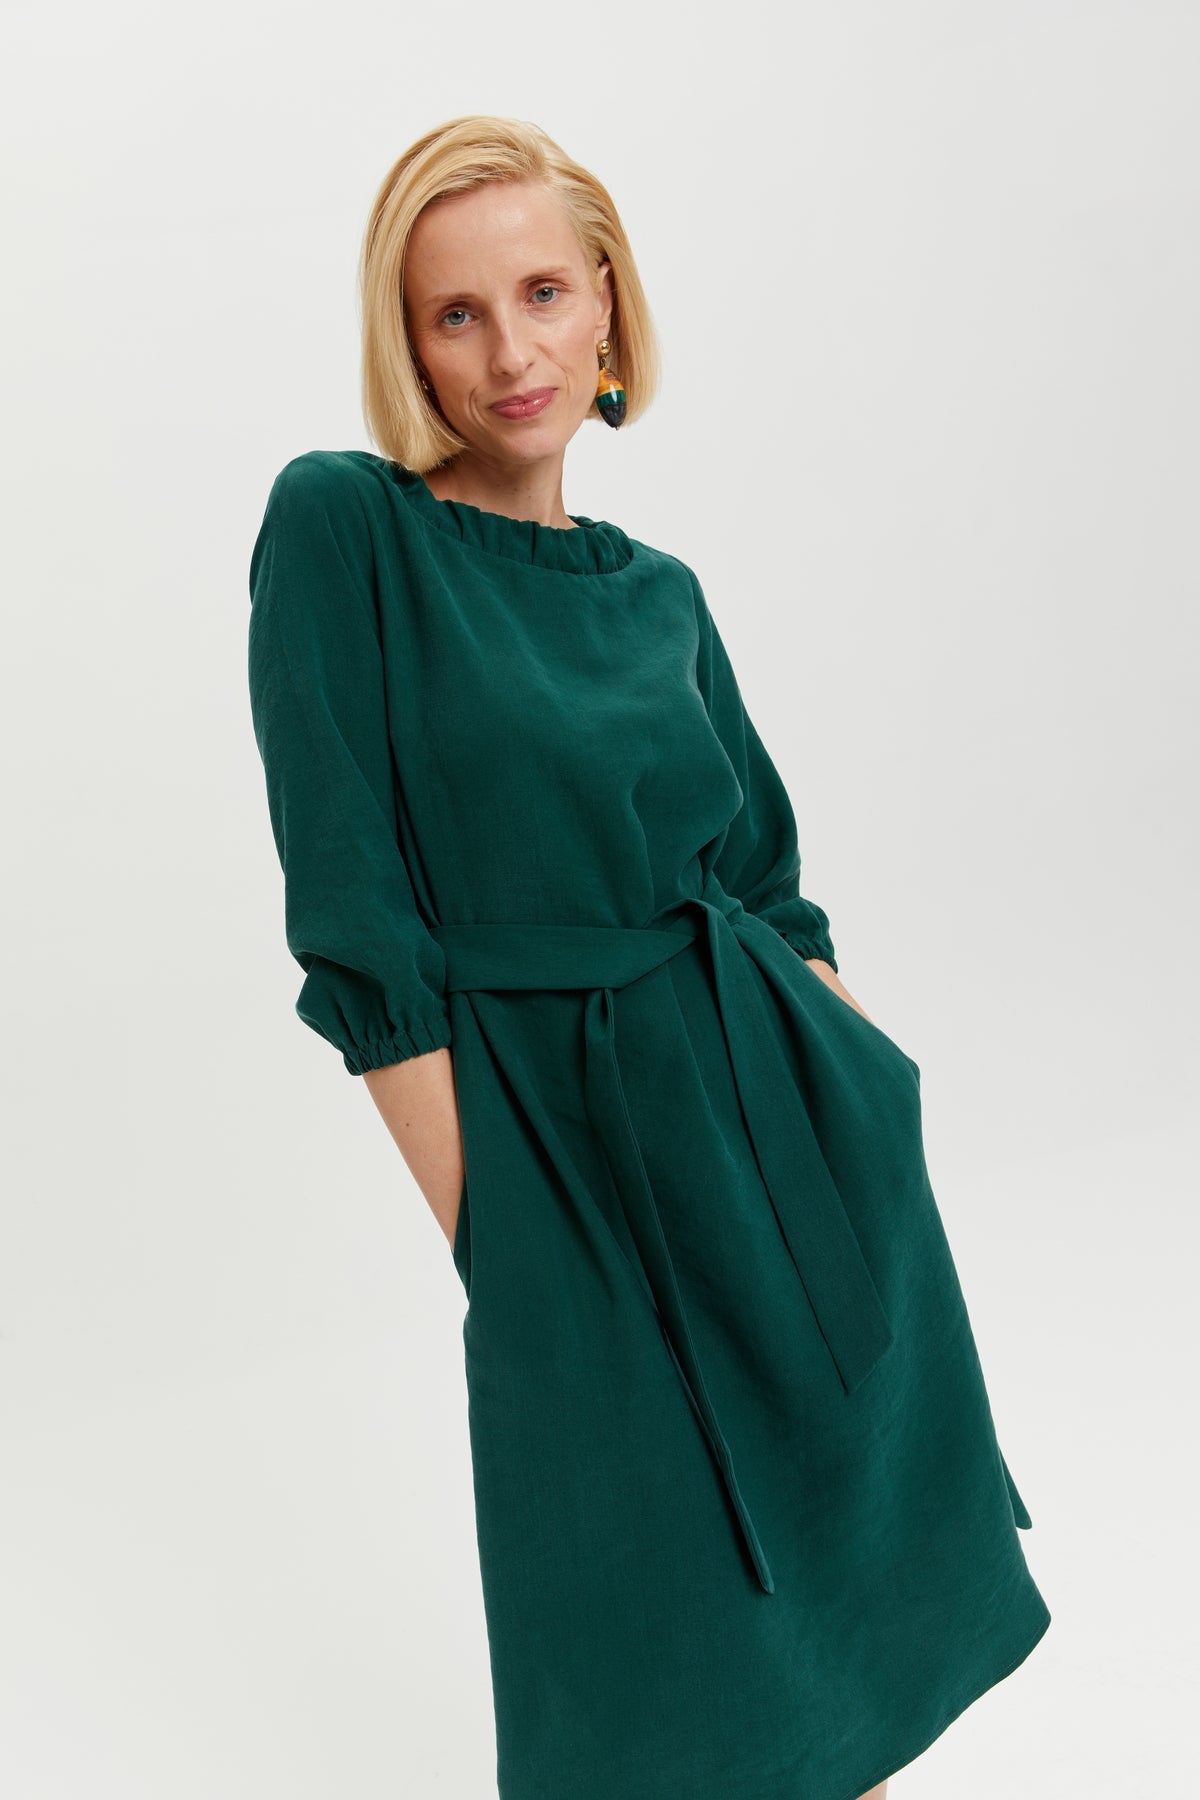 Celine | Elegant belted dress with décolleté element in forest green by Ayani